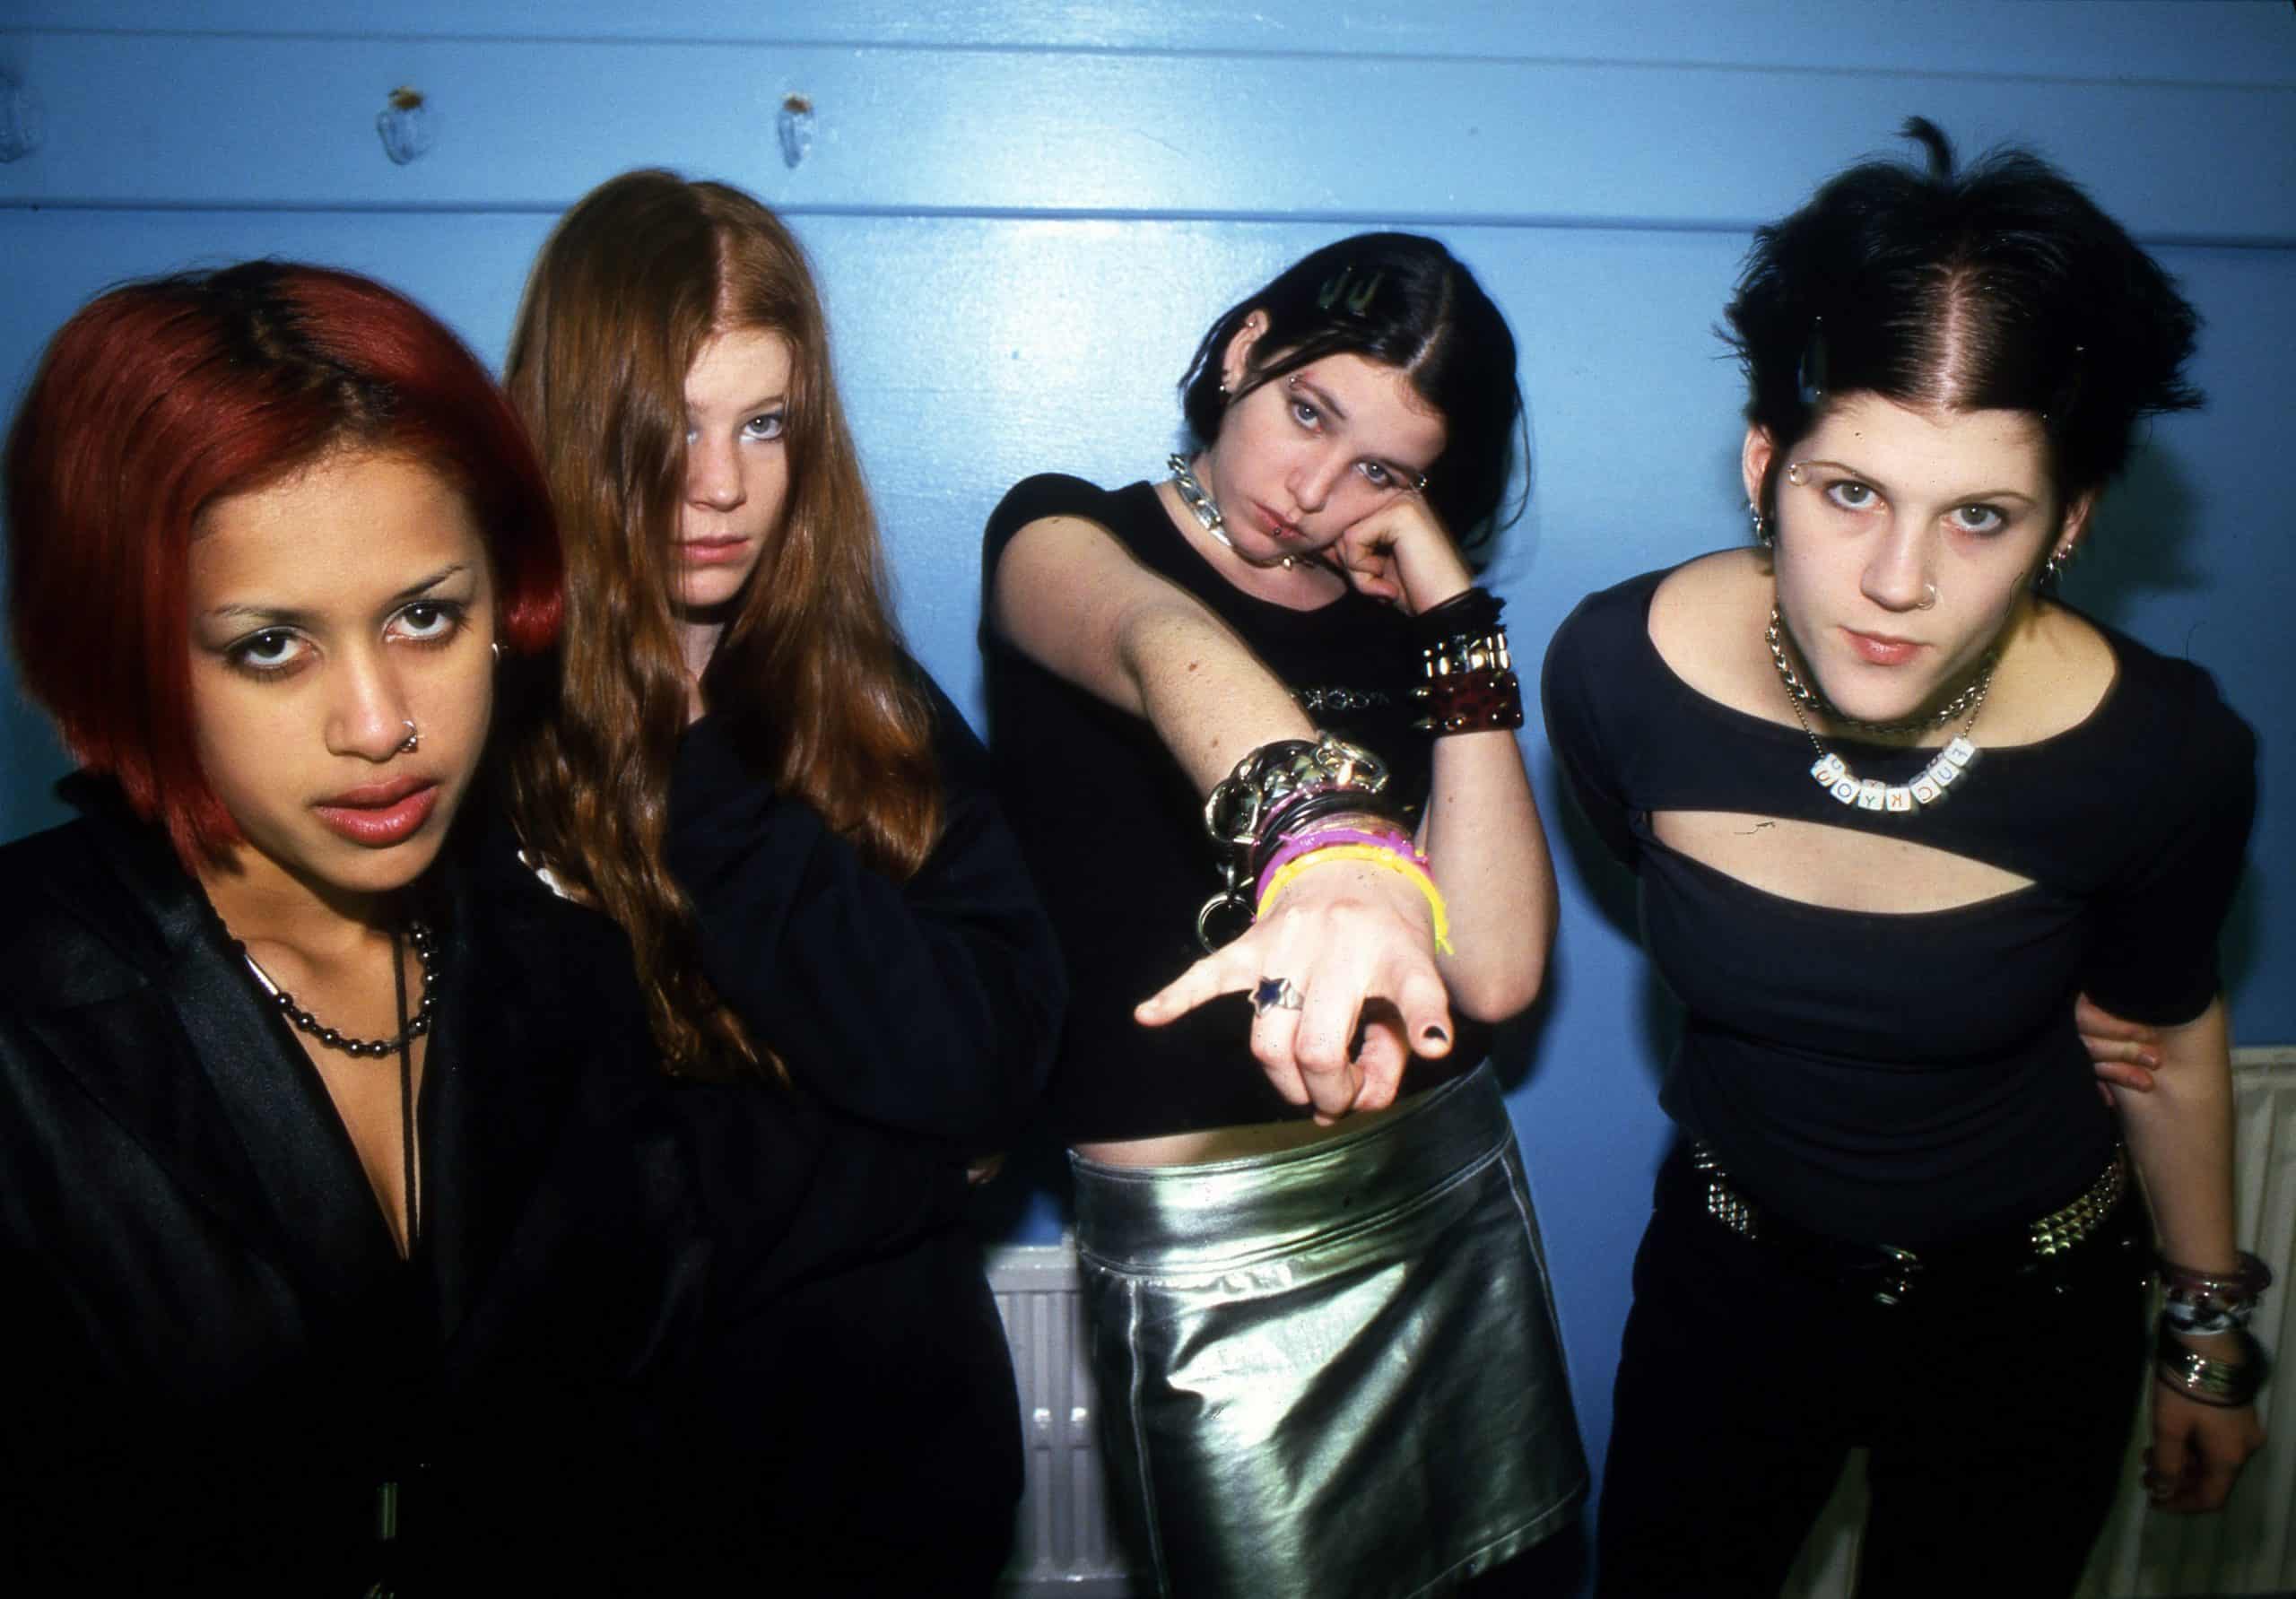 Watch Footage Of Original KITTIE Lineup Reuniting To Celebrate 22nd Anniversary Of ‘Spit’ Album